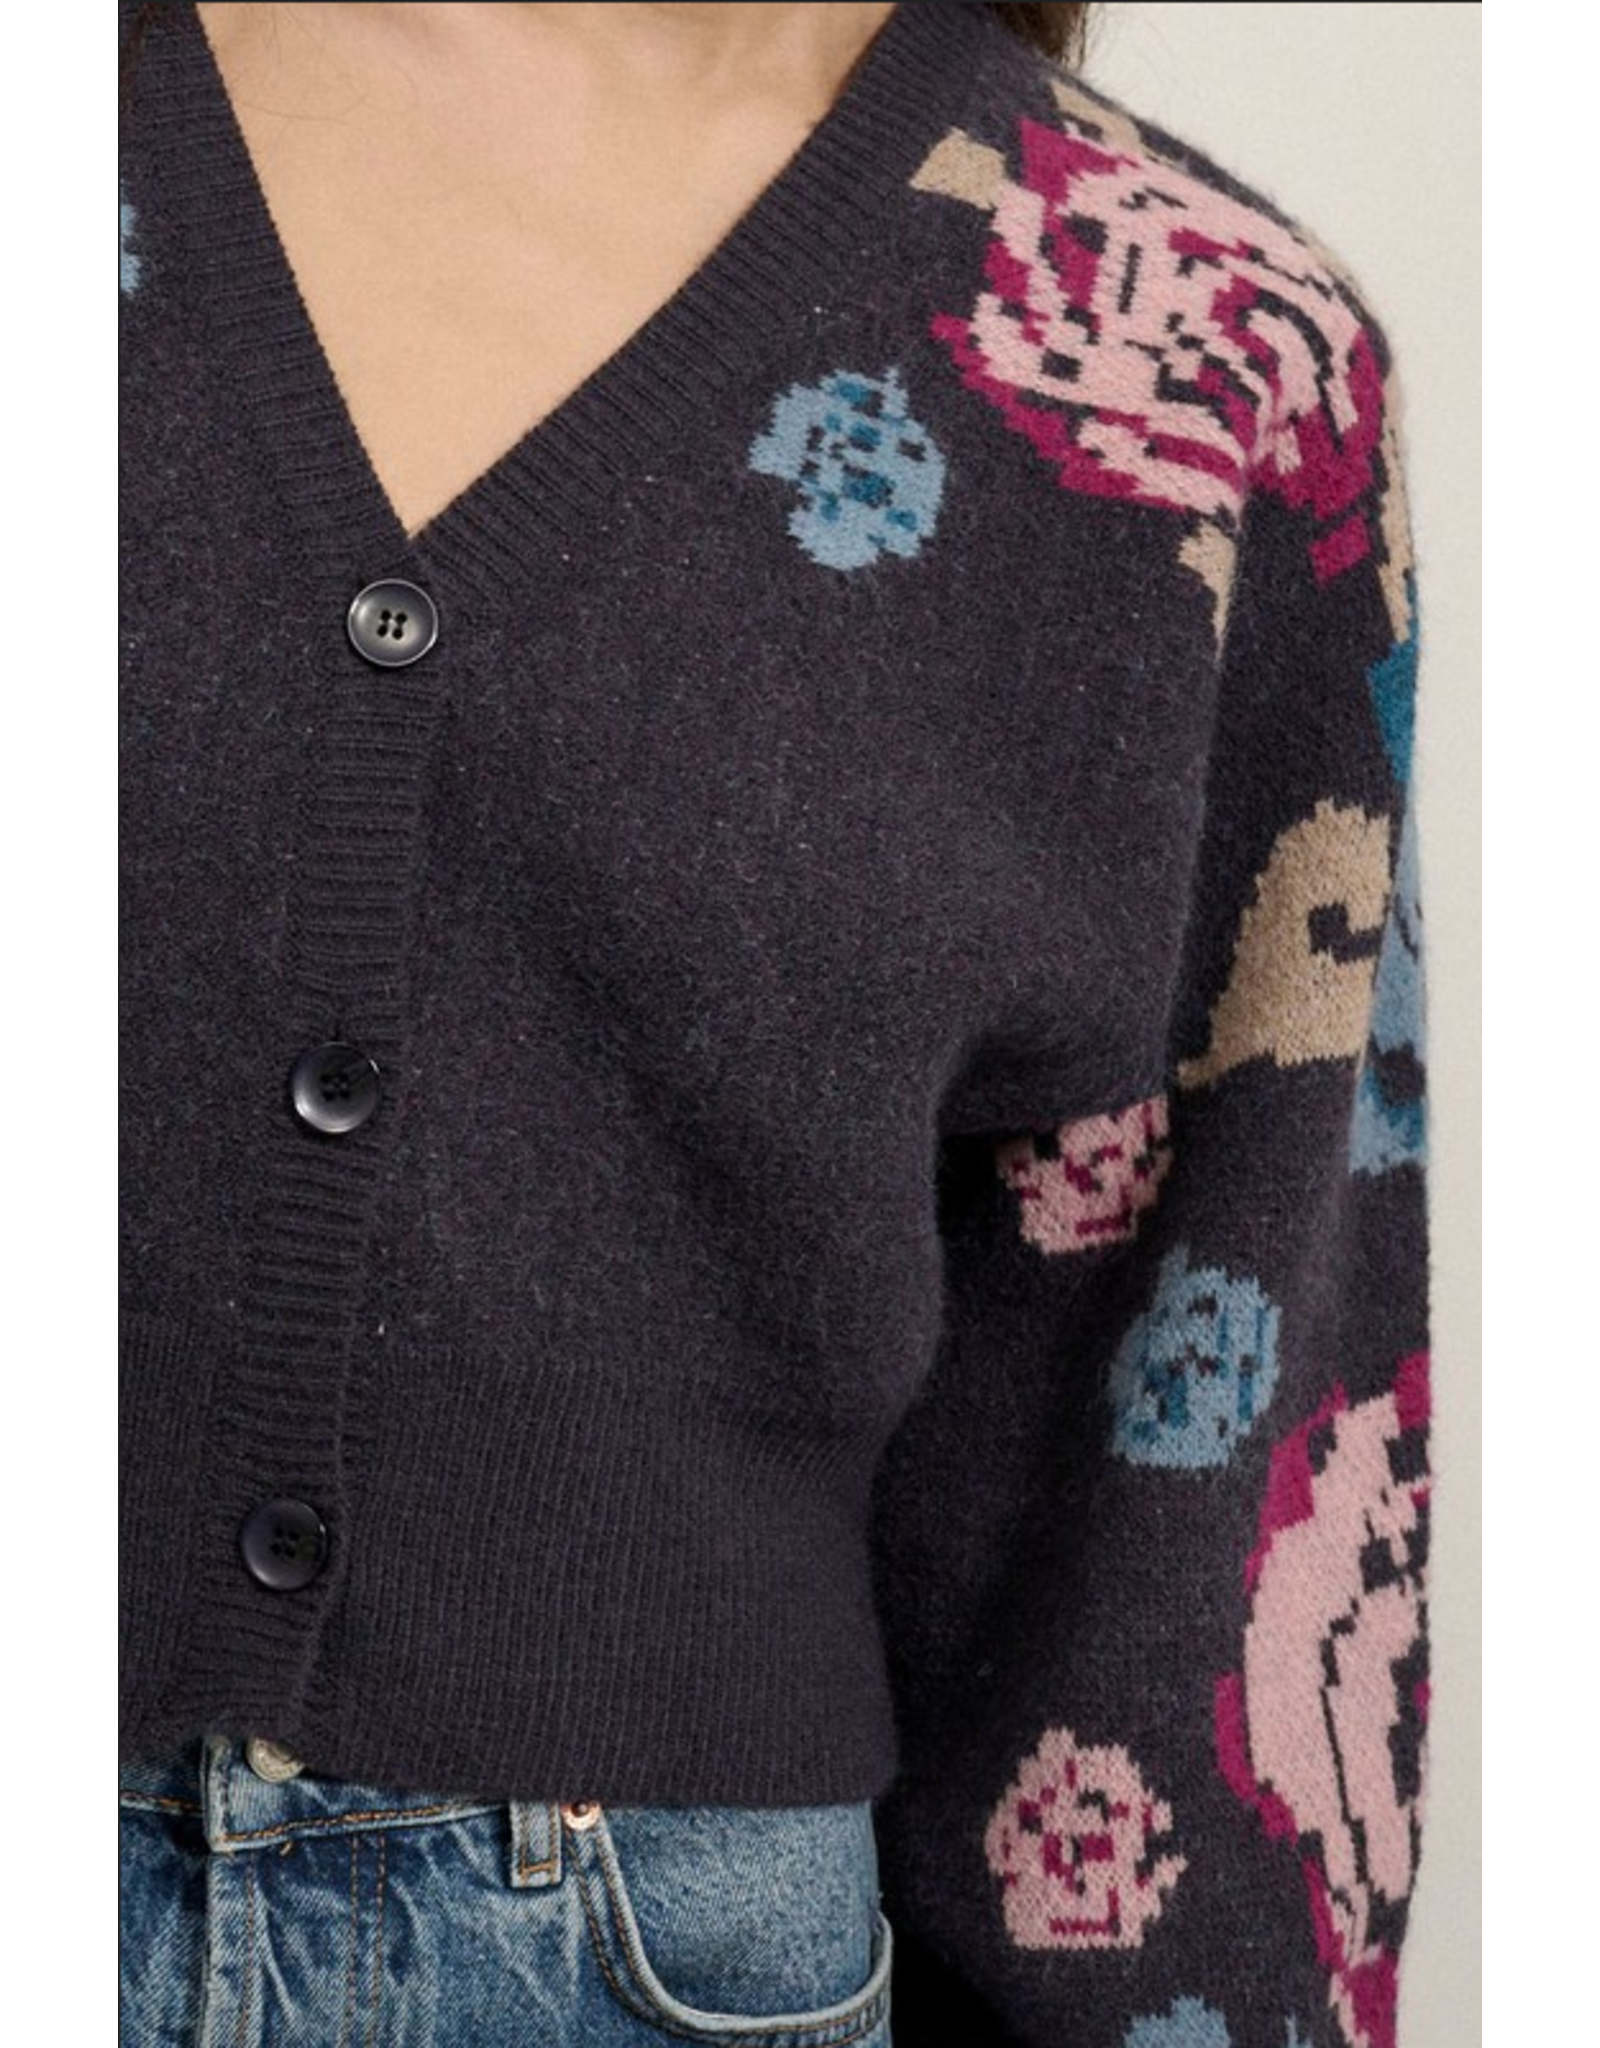 Promesa Floral Patterned Cardigan Sweater